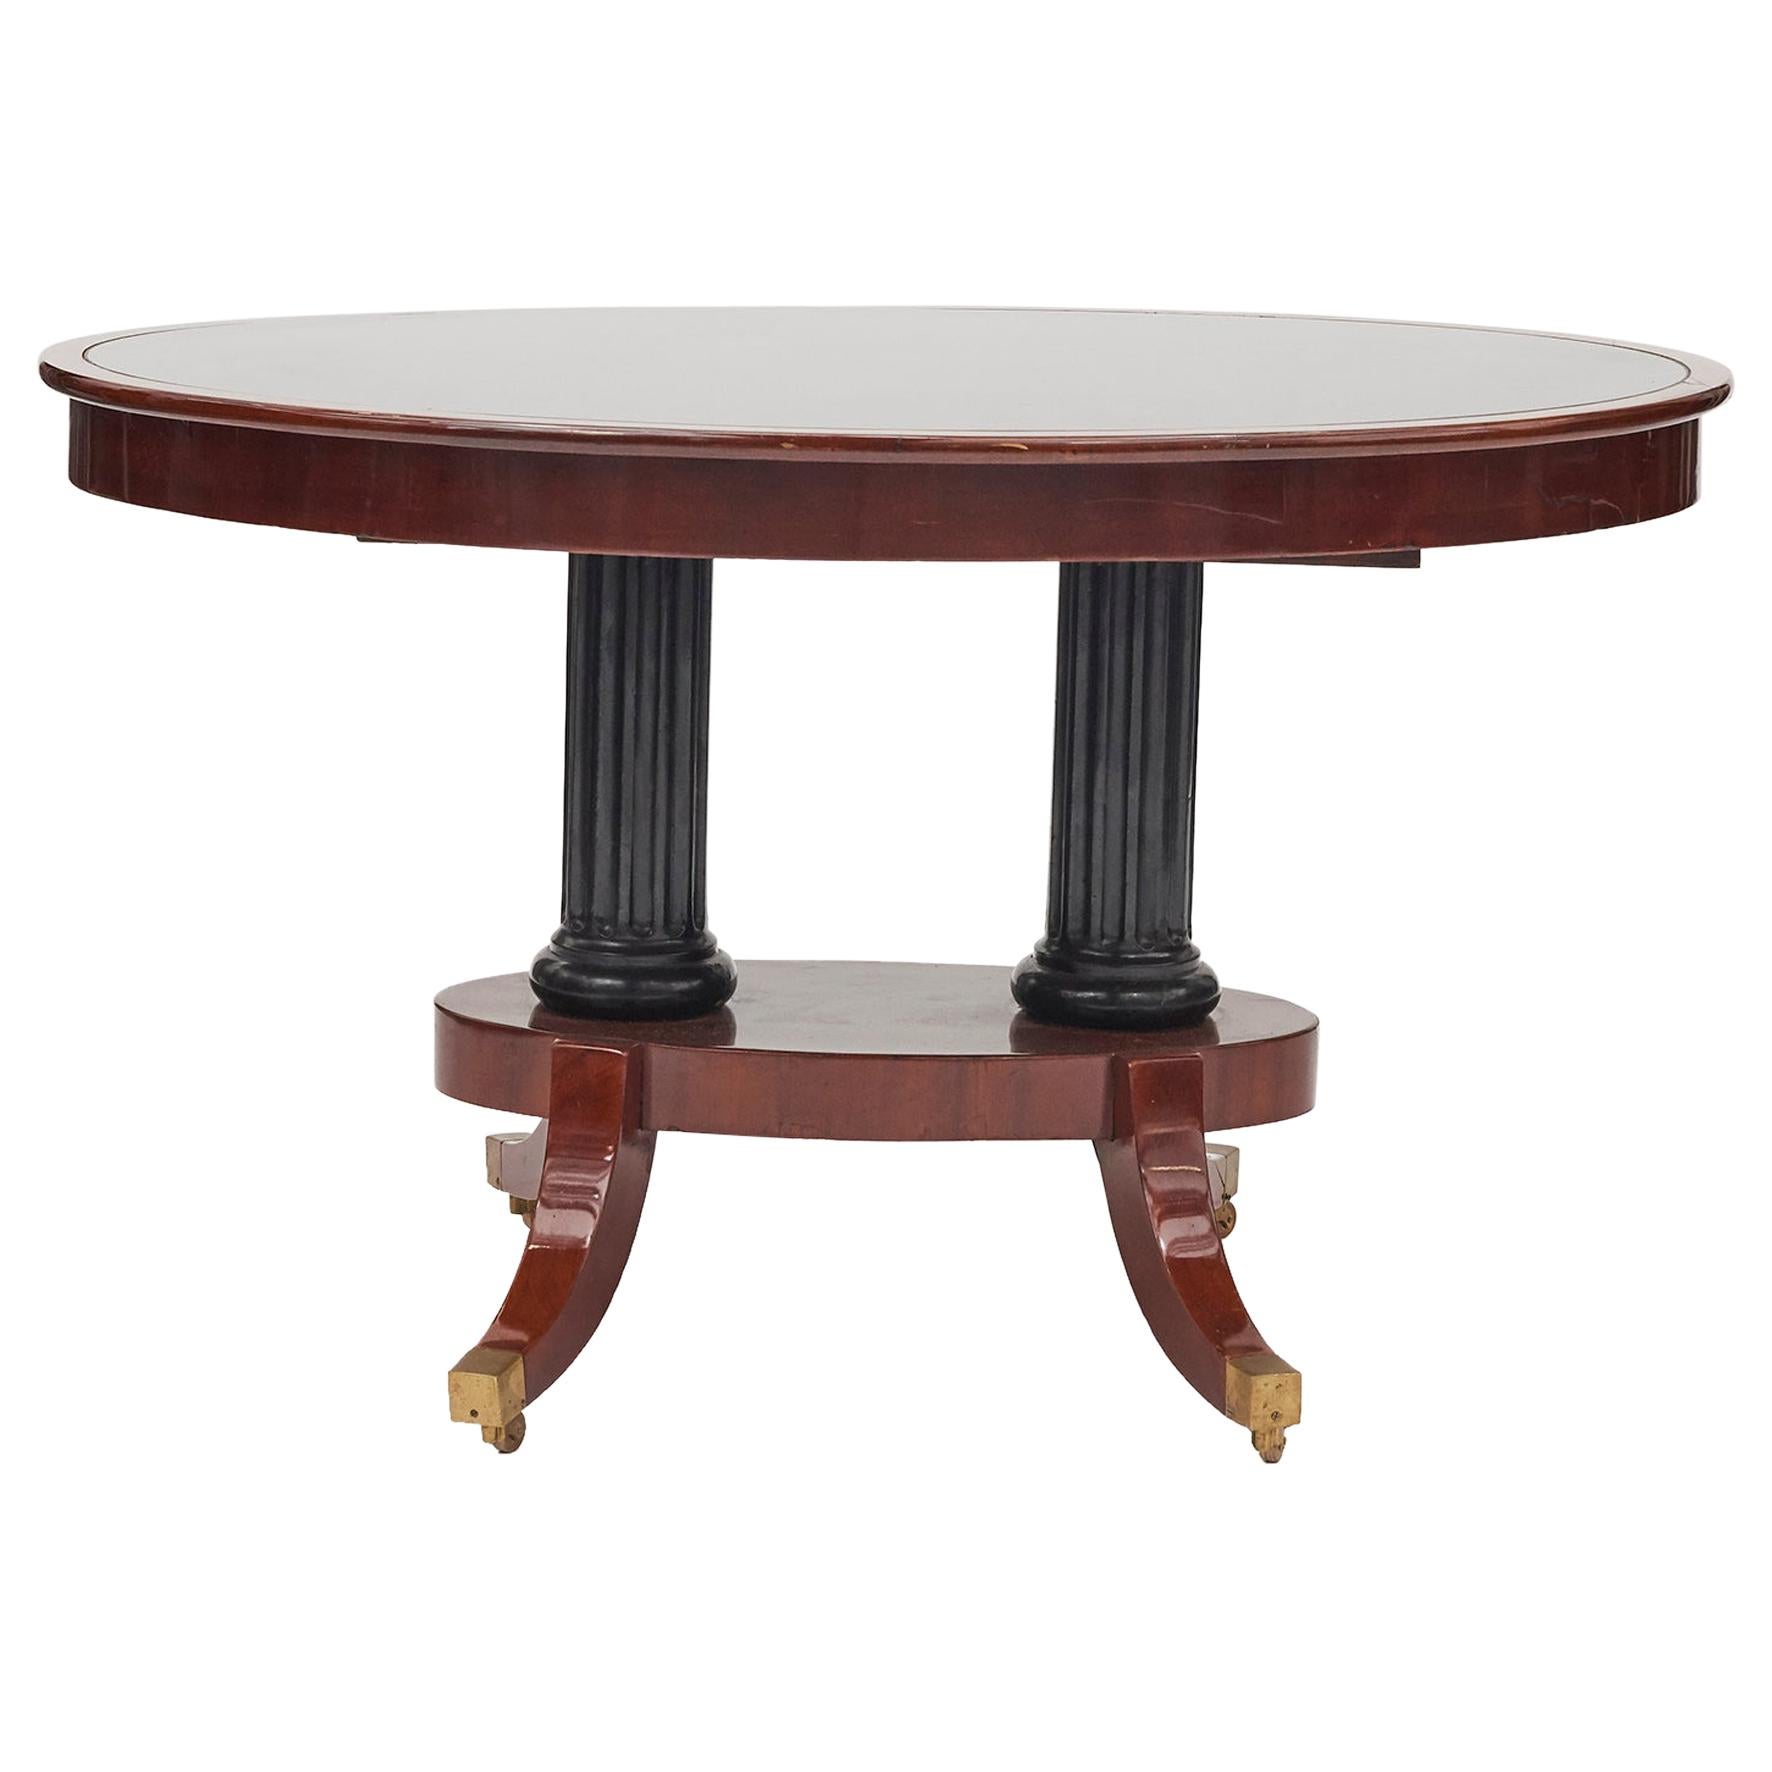 Late Empire Danish Mahogany Center Table with Black Glass Tabletop